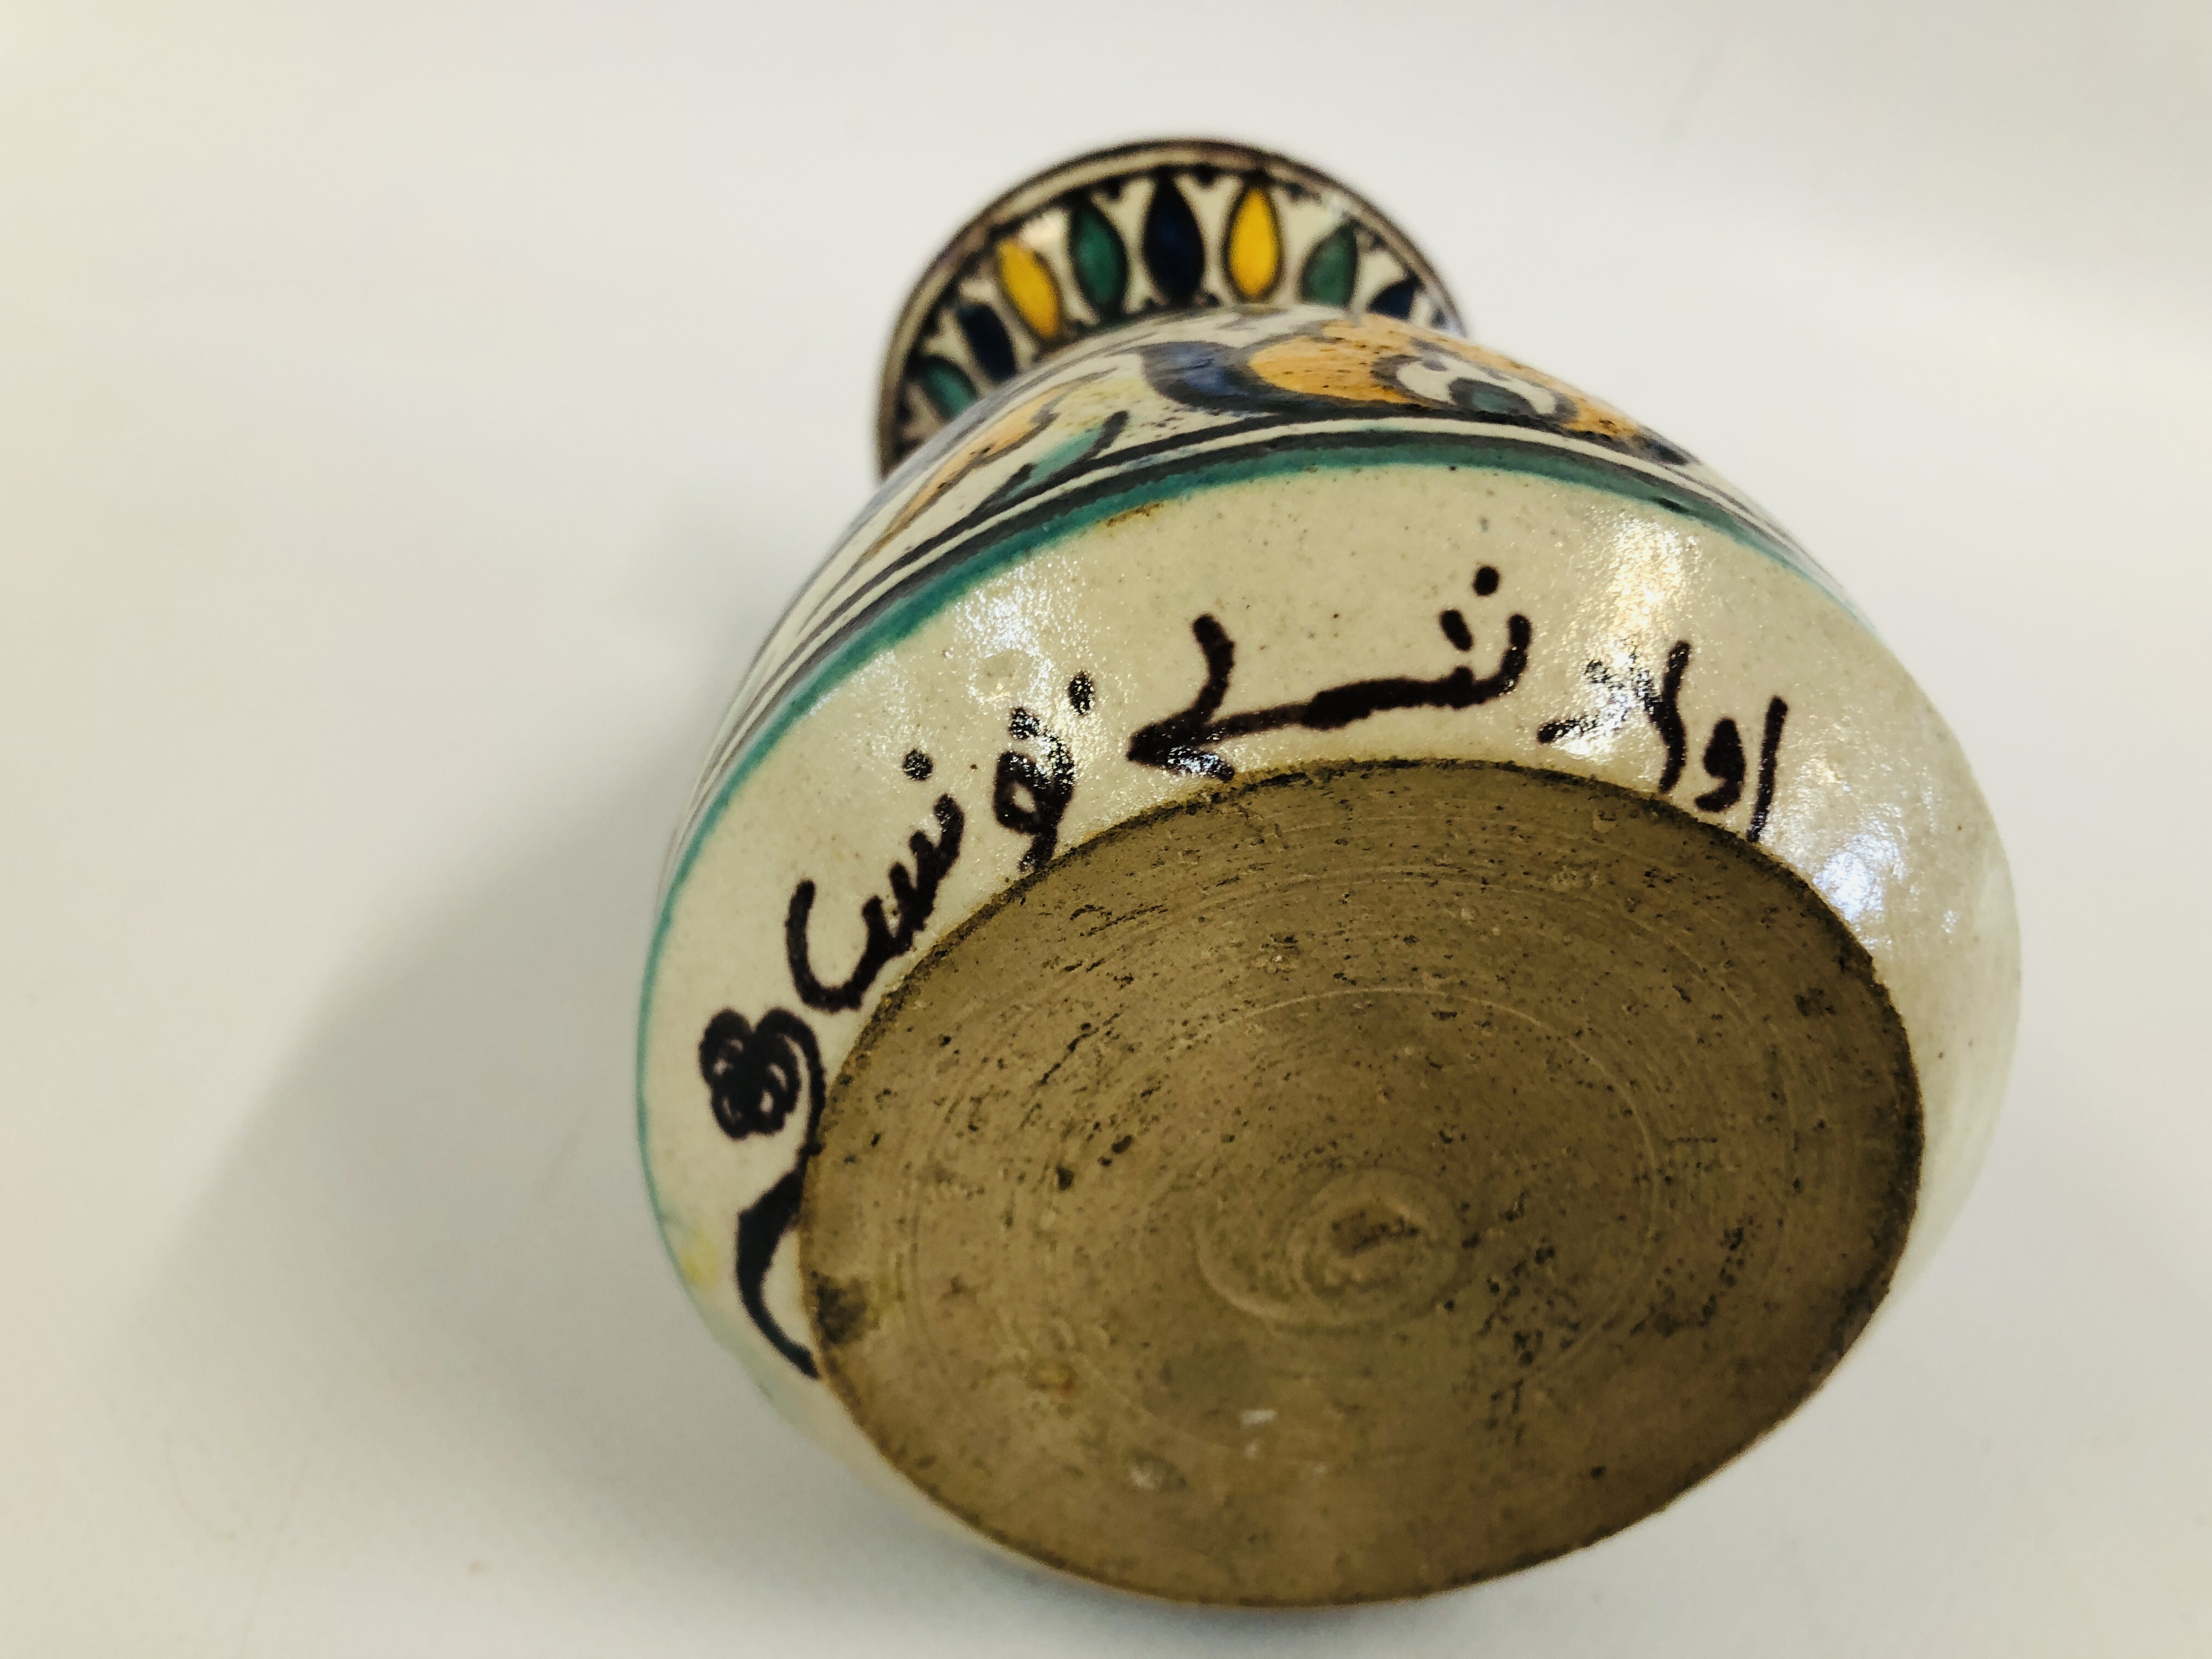 TWO PIECES OF HANDMADE MOROCCAN CERAMIC EXAMPLES, ONE BEARING INSCRIPTION. - Image 16 of 17